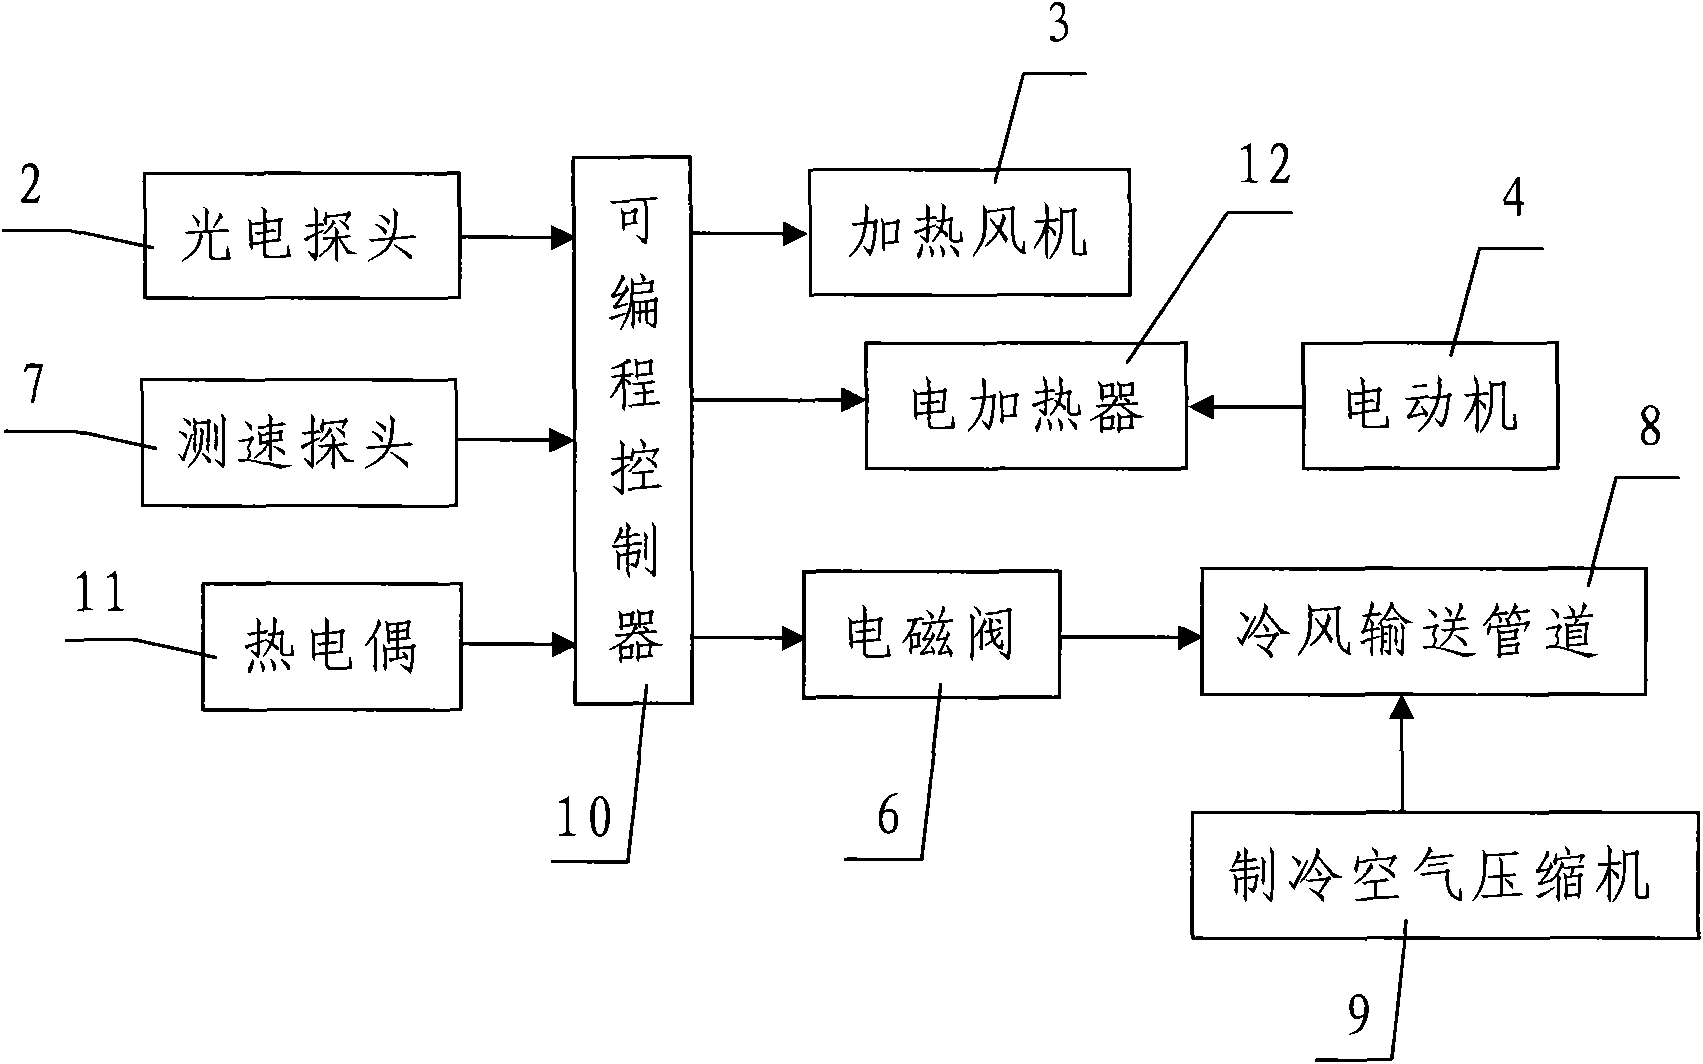 Temperature control system for large temperature difference adjustment of reflow soldering machine and temperature control method